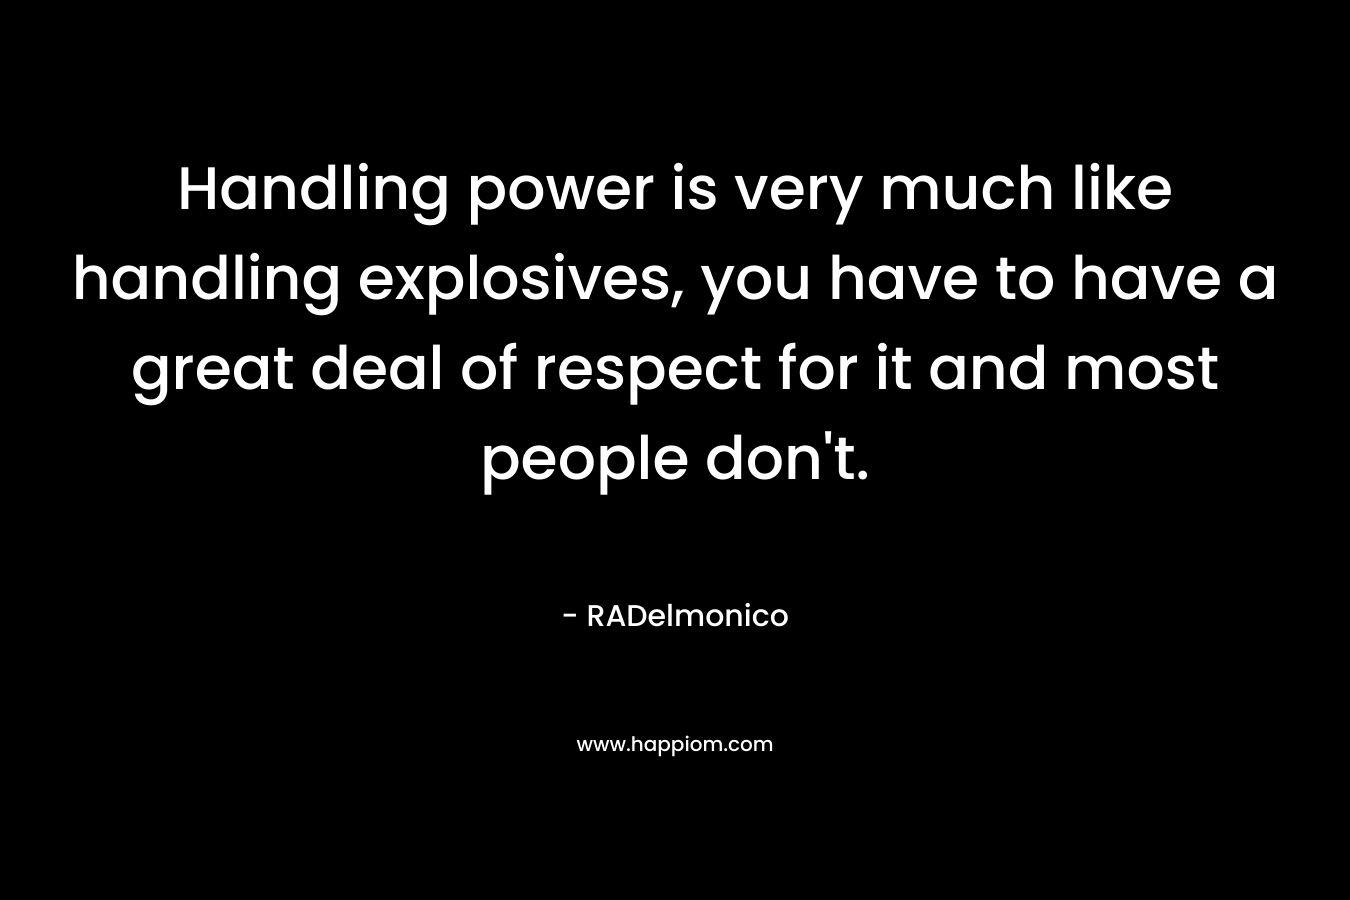 Handling power is very much like handling explosives, you have to have a great deal of respect for it and most people don’t. – RADelmonico